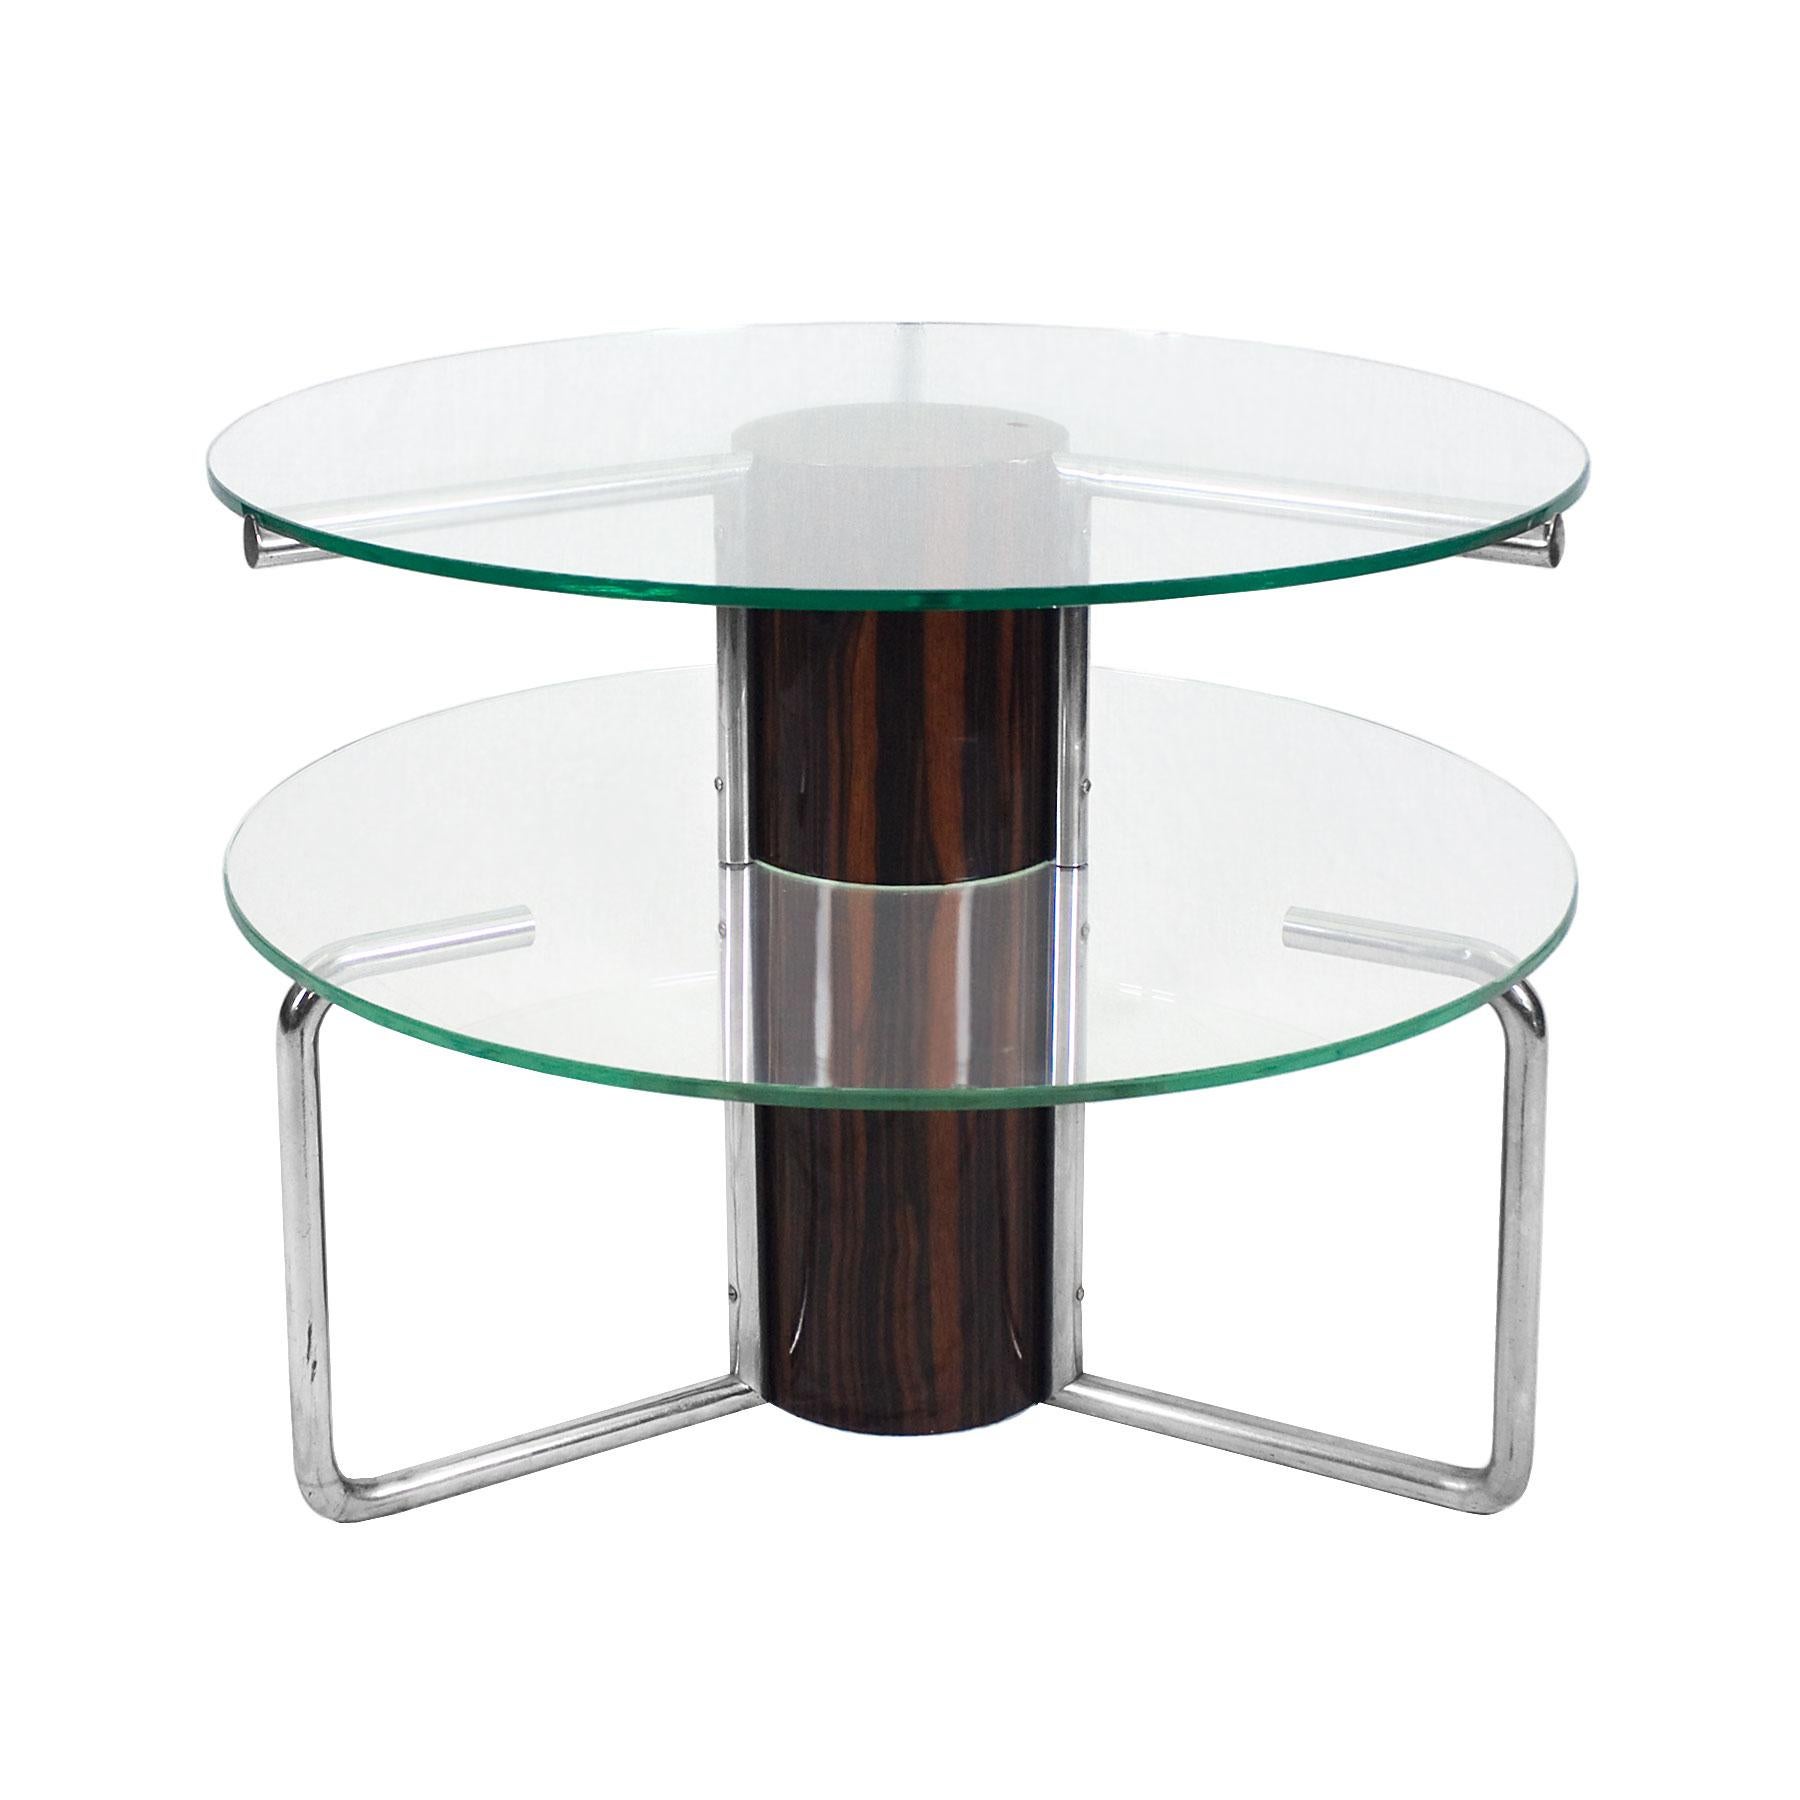 Large center table with a central stand in solid wood with French polished Macassar ebony veneer, and six screwed chrome-plated tubes holding up the two thick original glasses plates.

Italy, circa 1930.